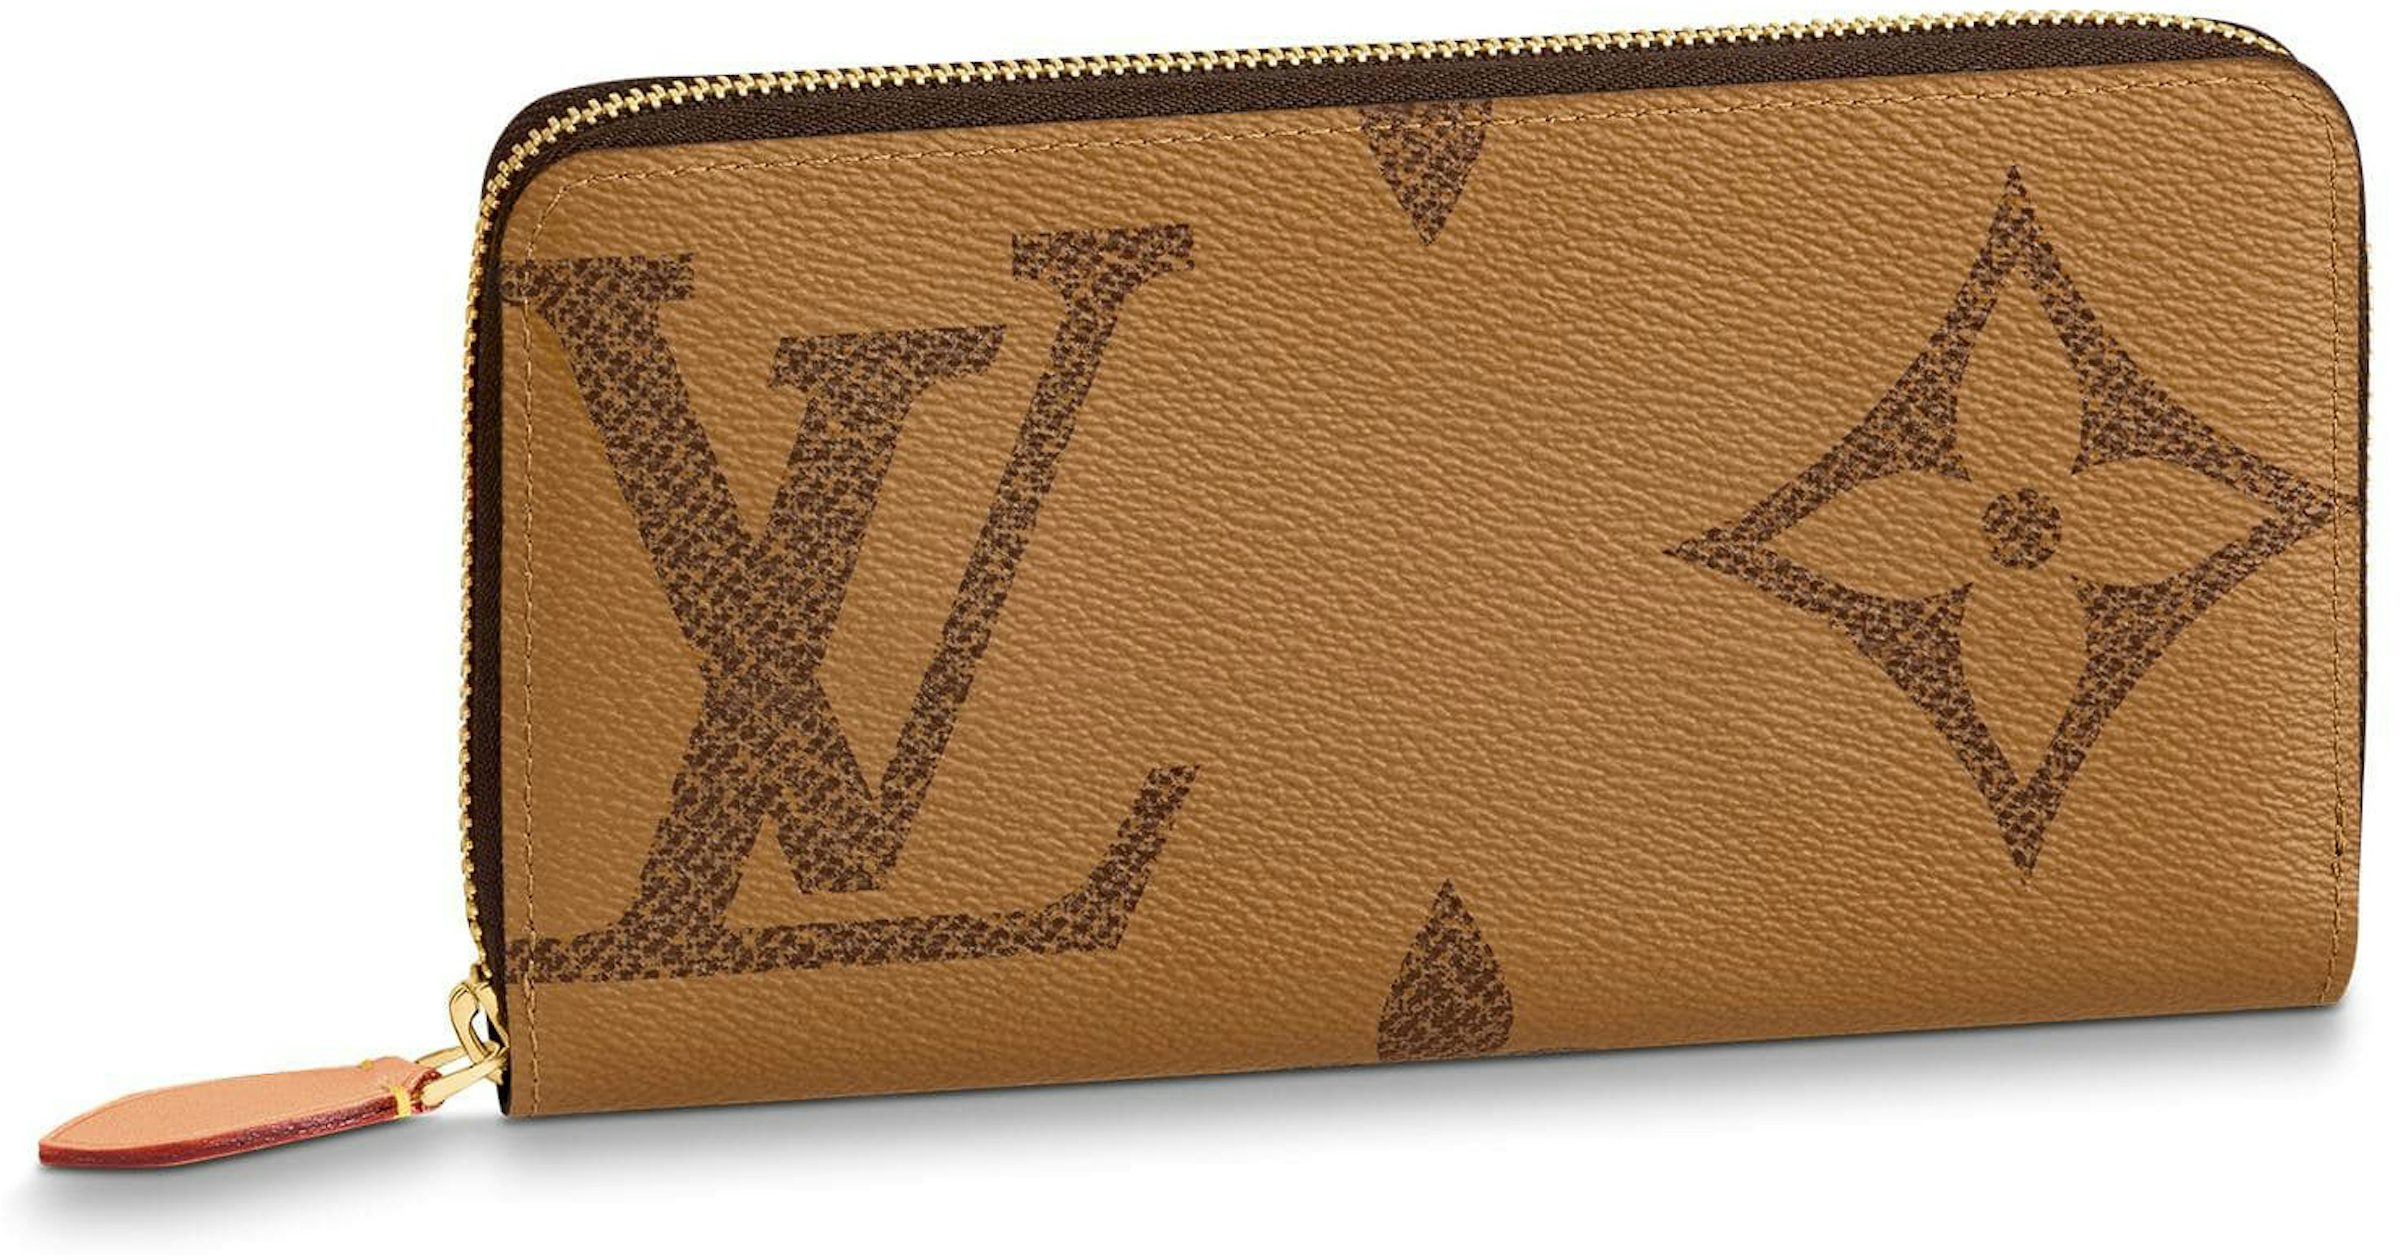 How To Check If A Louis Vuitton Bag Is Real Top Sellers, SAVE 56% 